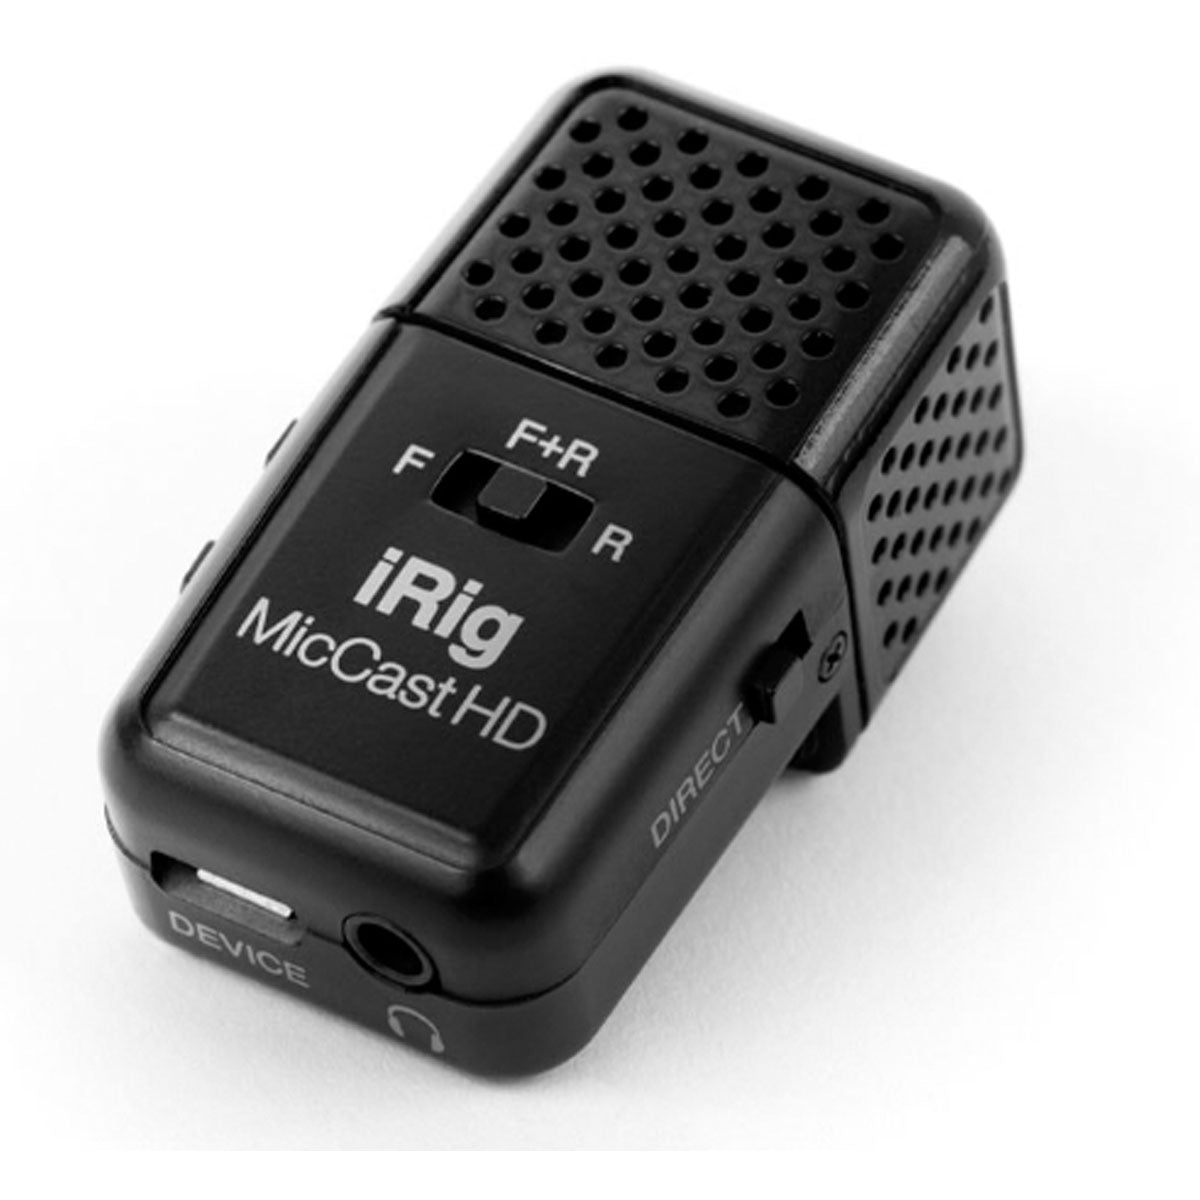 IK Multimedia iRig Mic Cast HD Digital Microphone for iOS & Android Devices